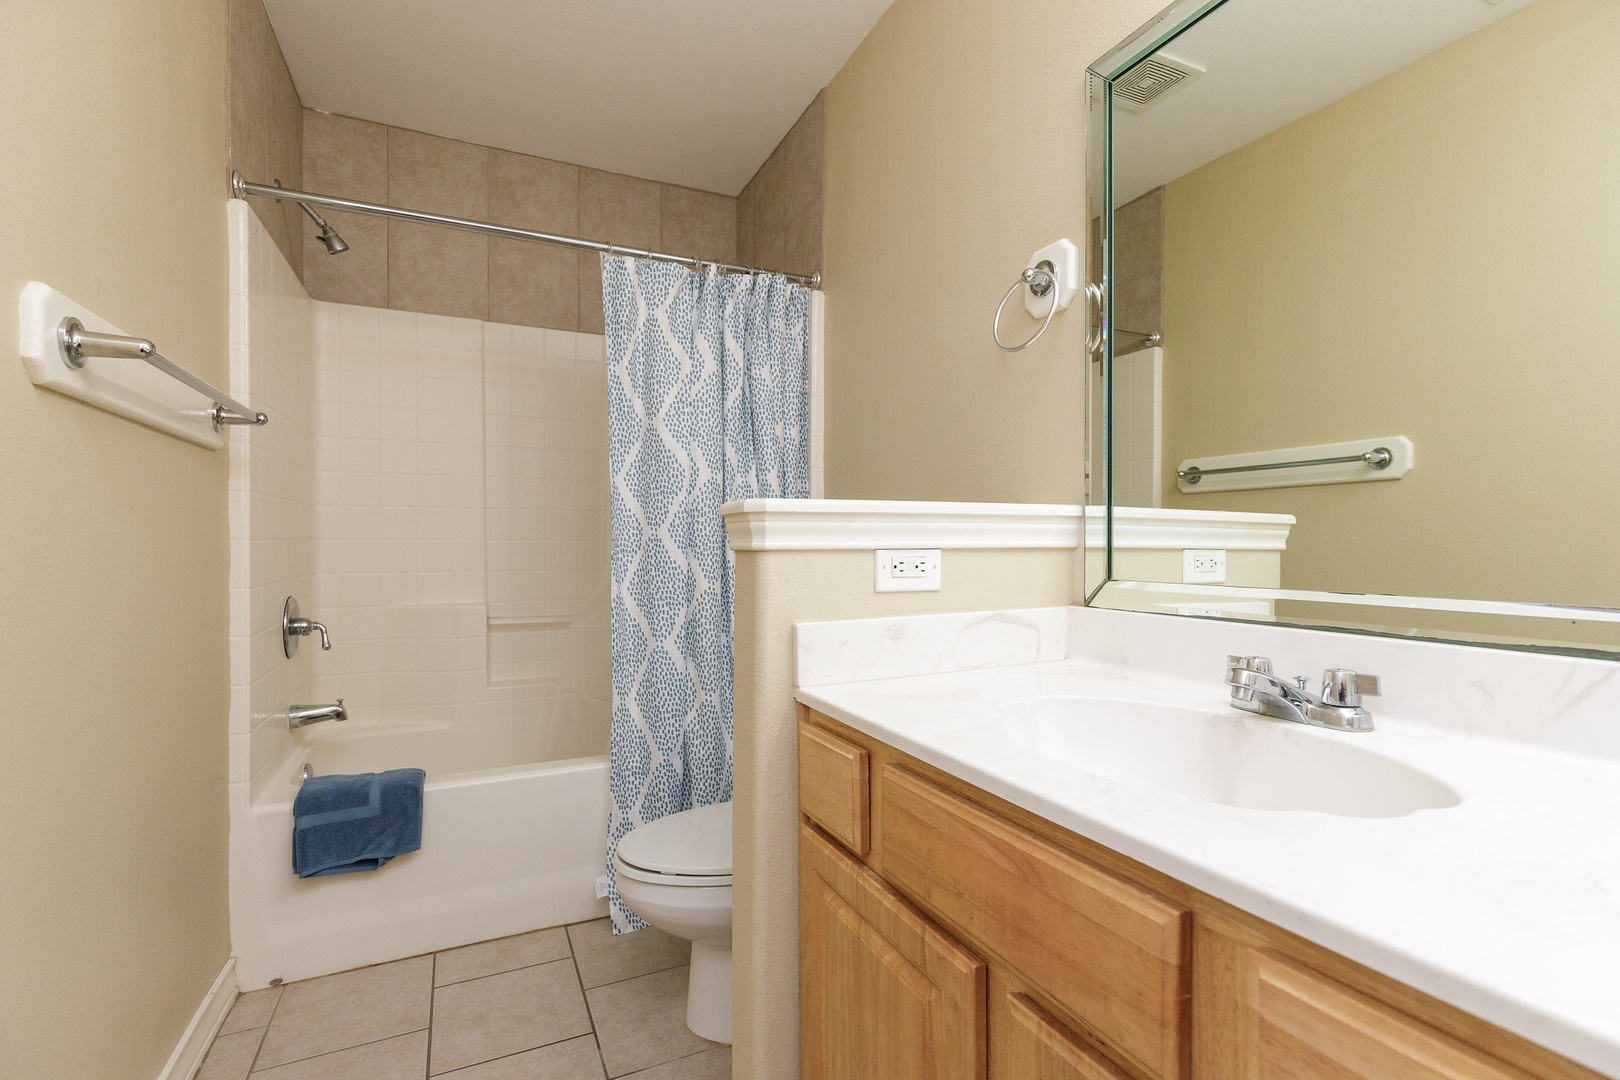 This 3rd-floor ensuite bath includes a single vanity & shower/tub combo